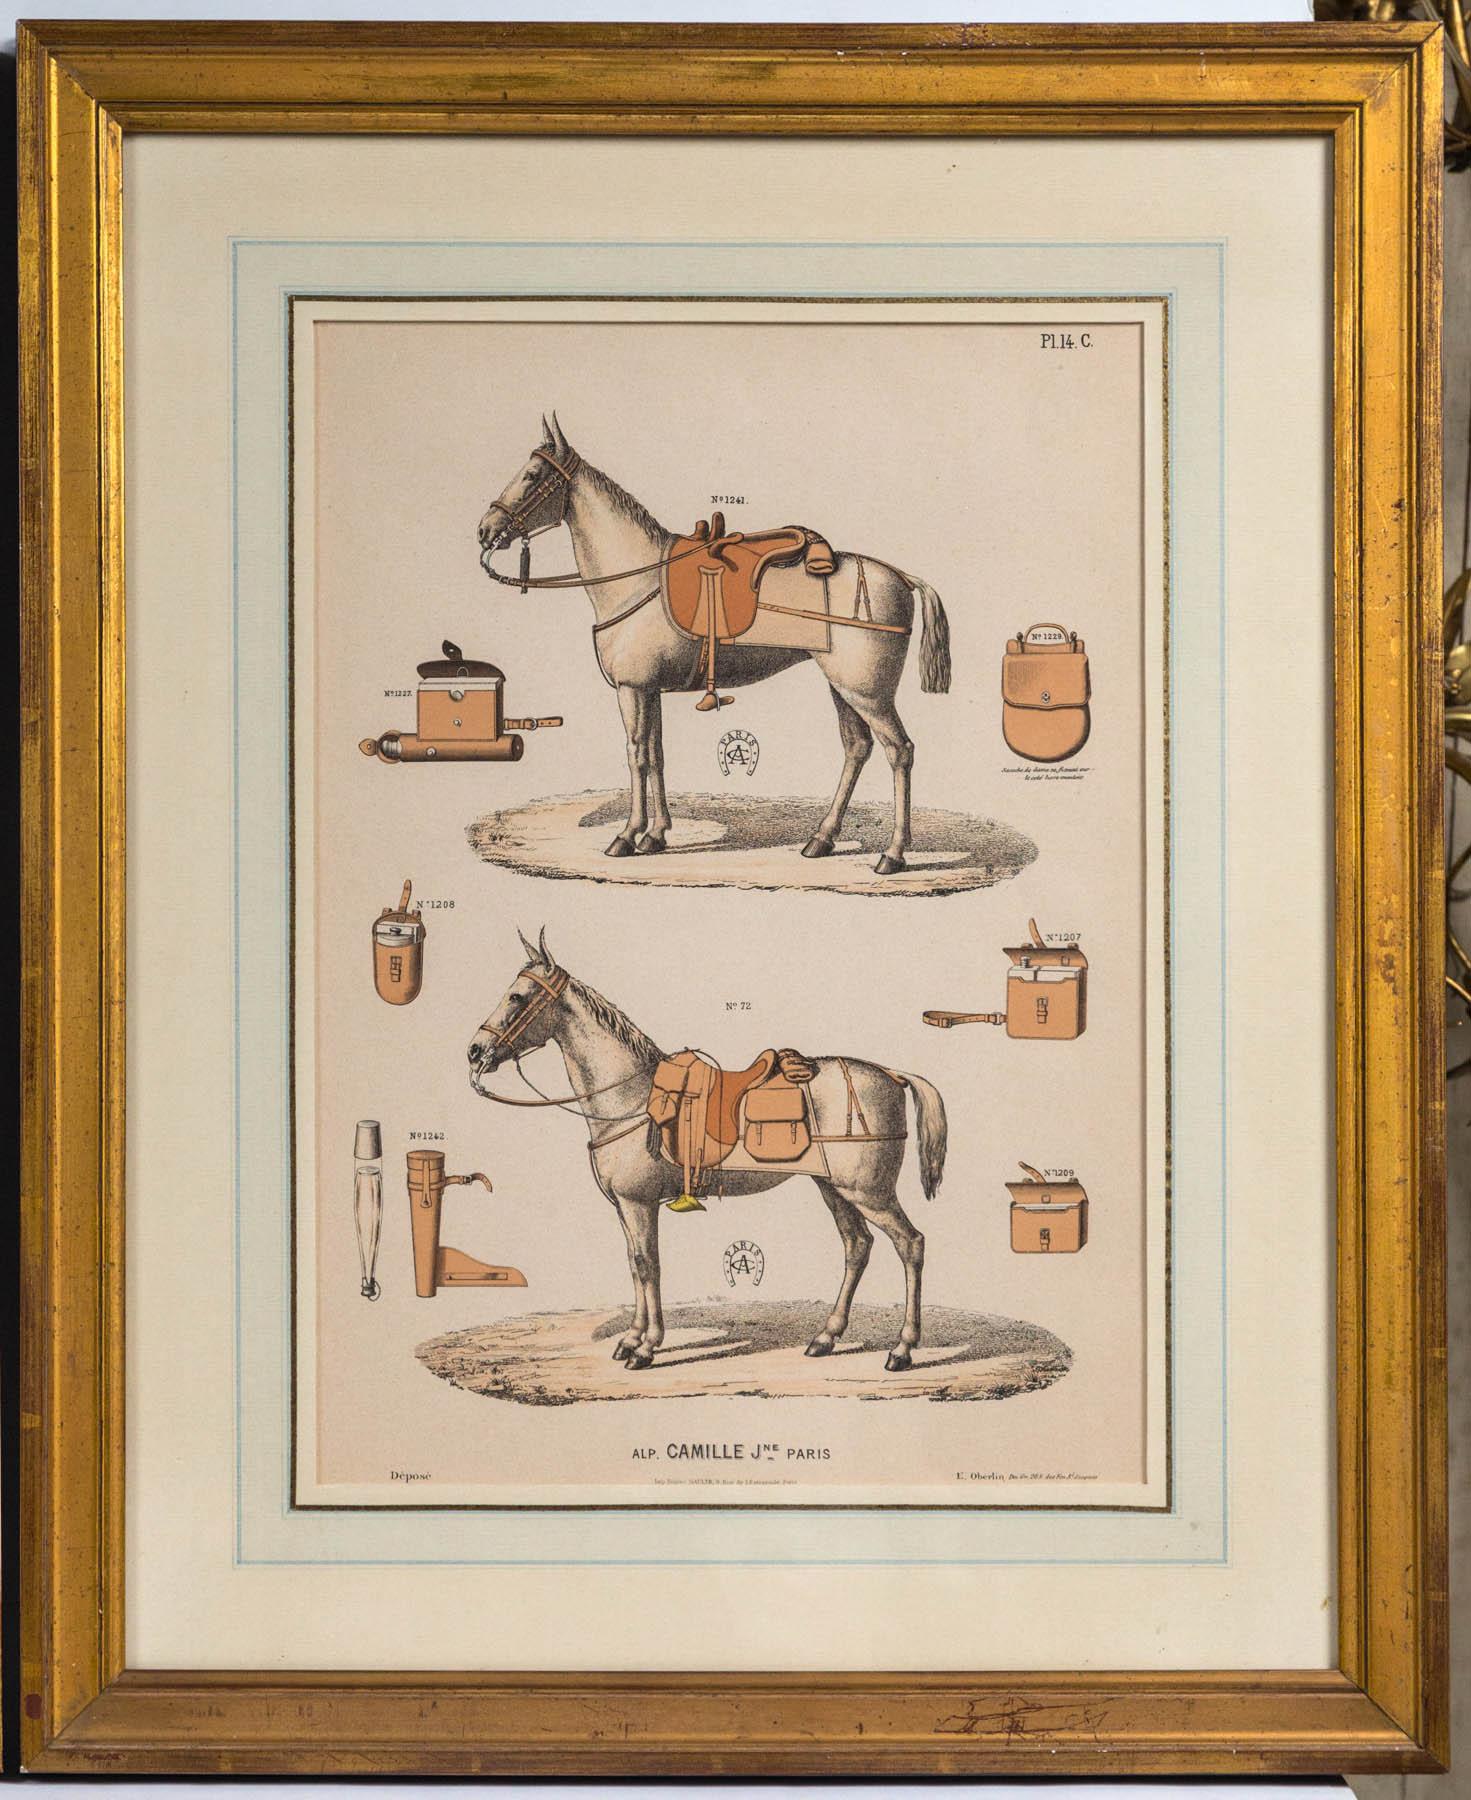 French Set of 5 Horse Related Engravings  by Camille & Fils, Paris